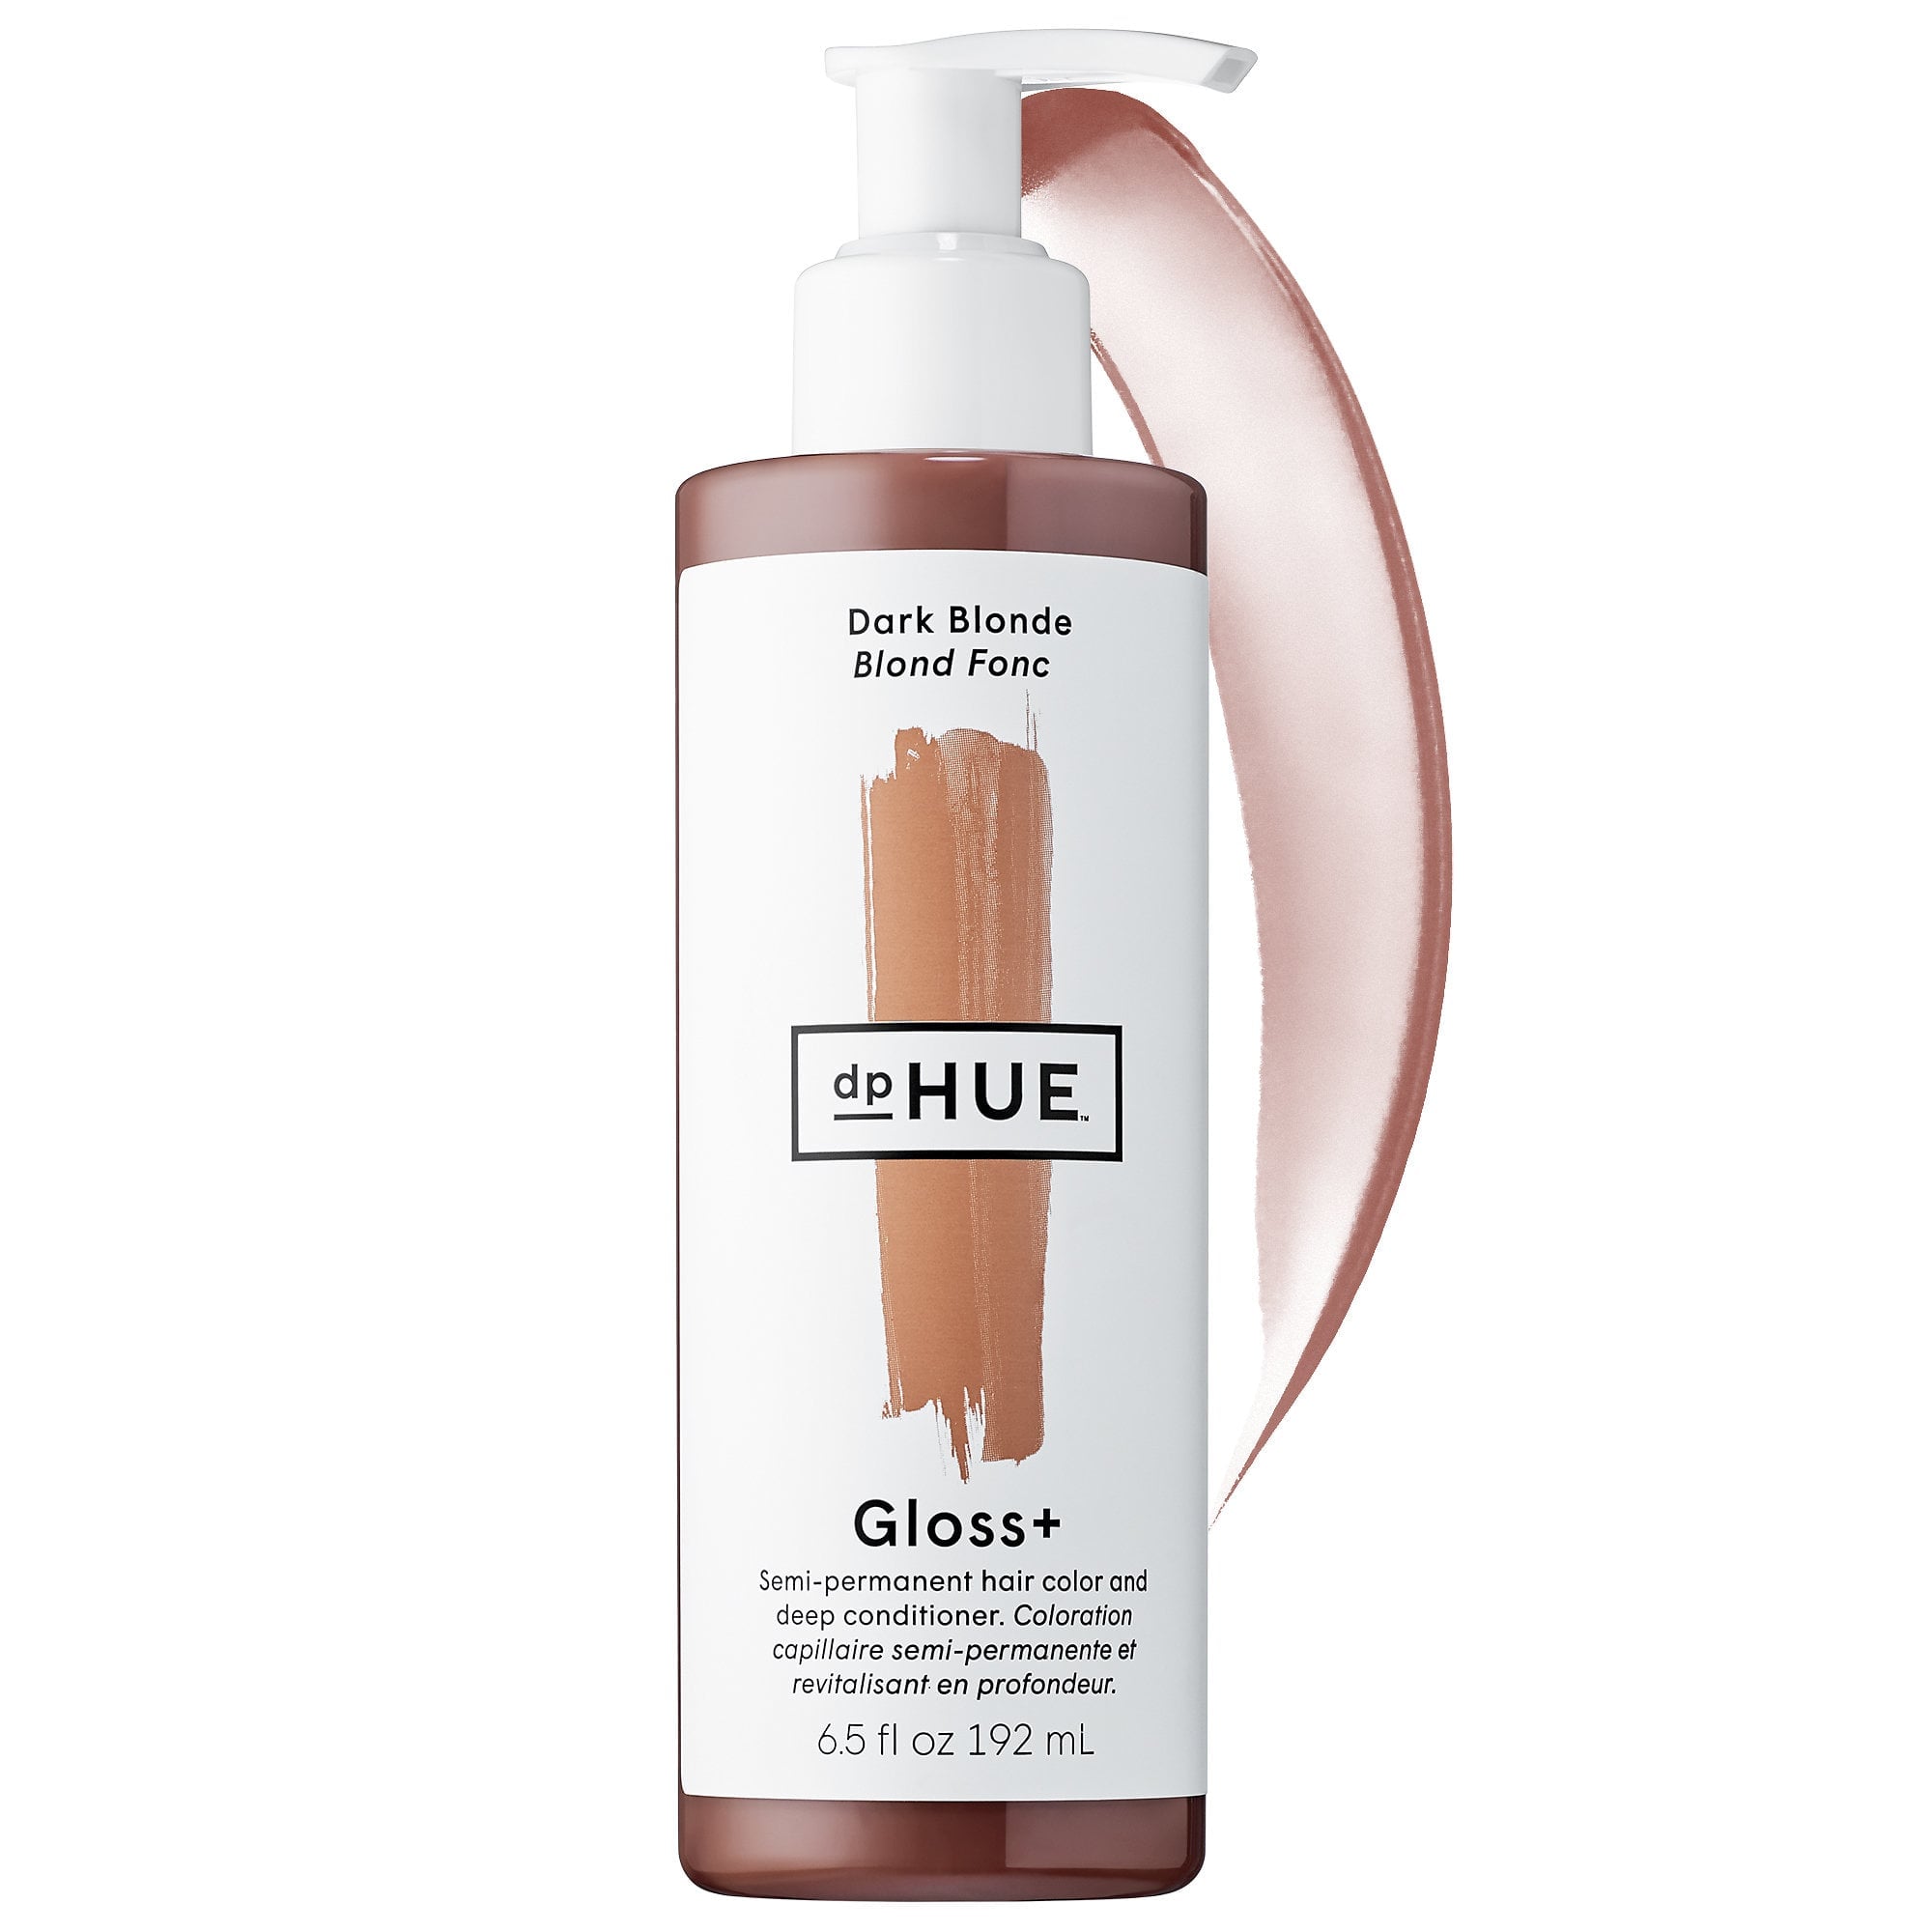 Dphue Gloss Semi Permanent Hair Color And Deep Conditioner Here